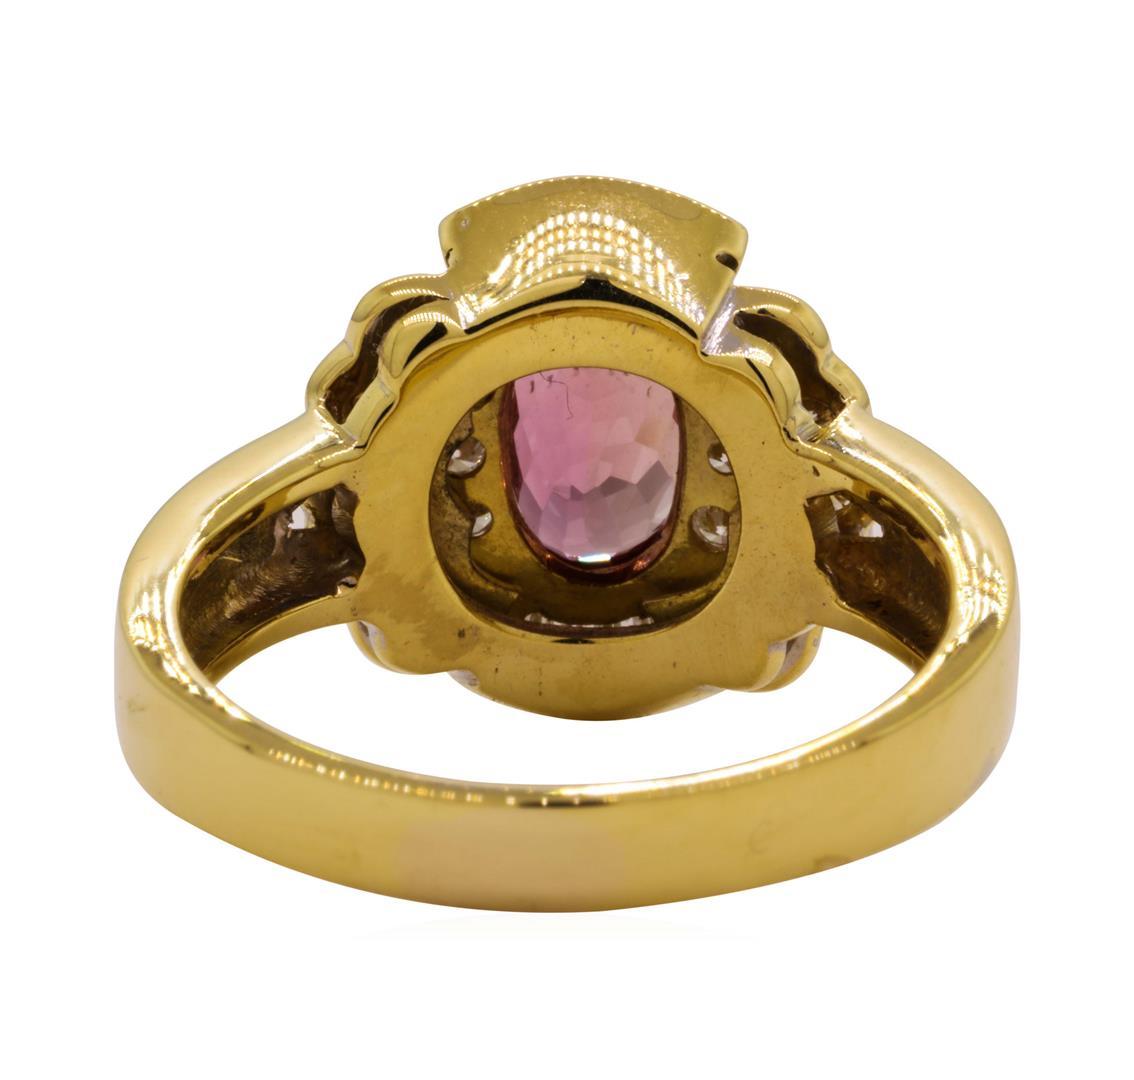 1.82 ctw Pink Spinel and Diamond Ring - 18KT Yellow Gold